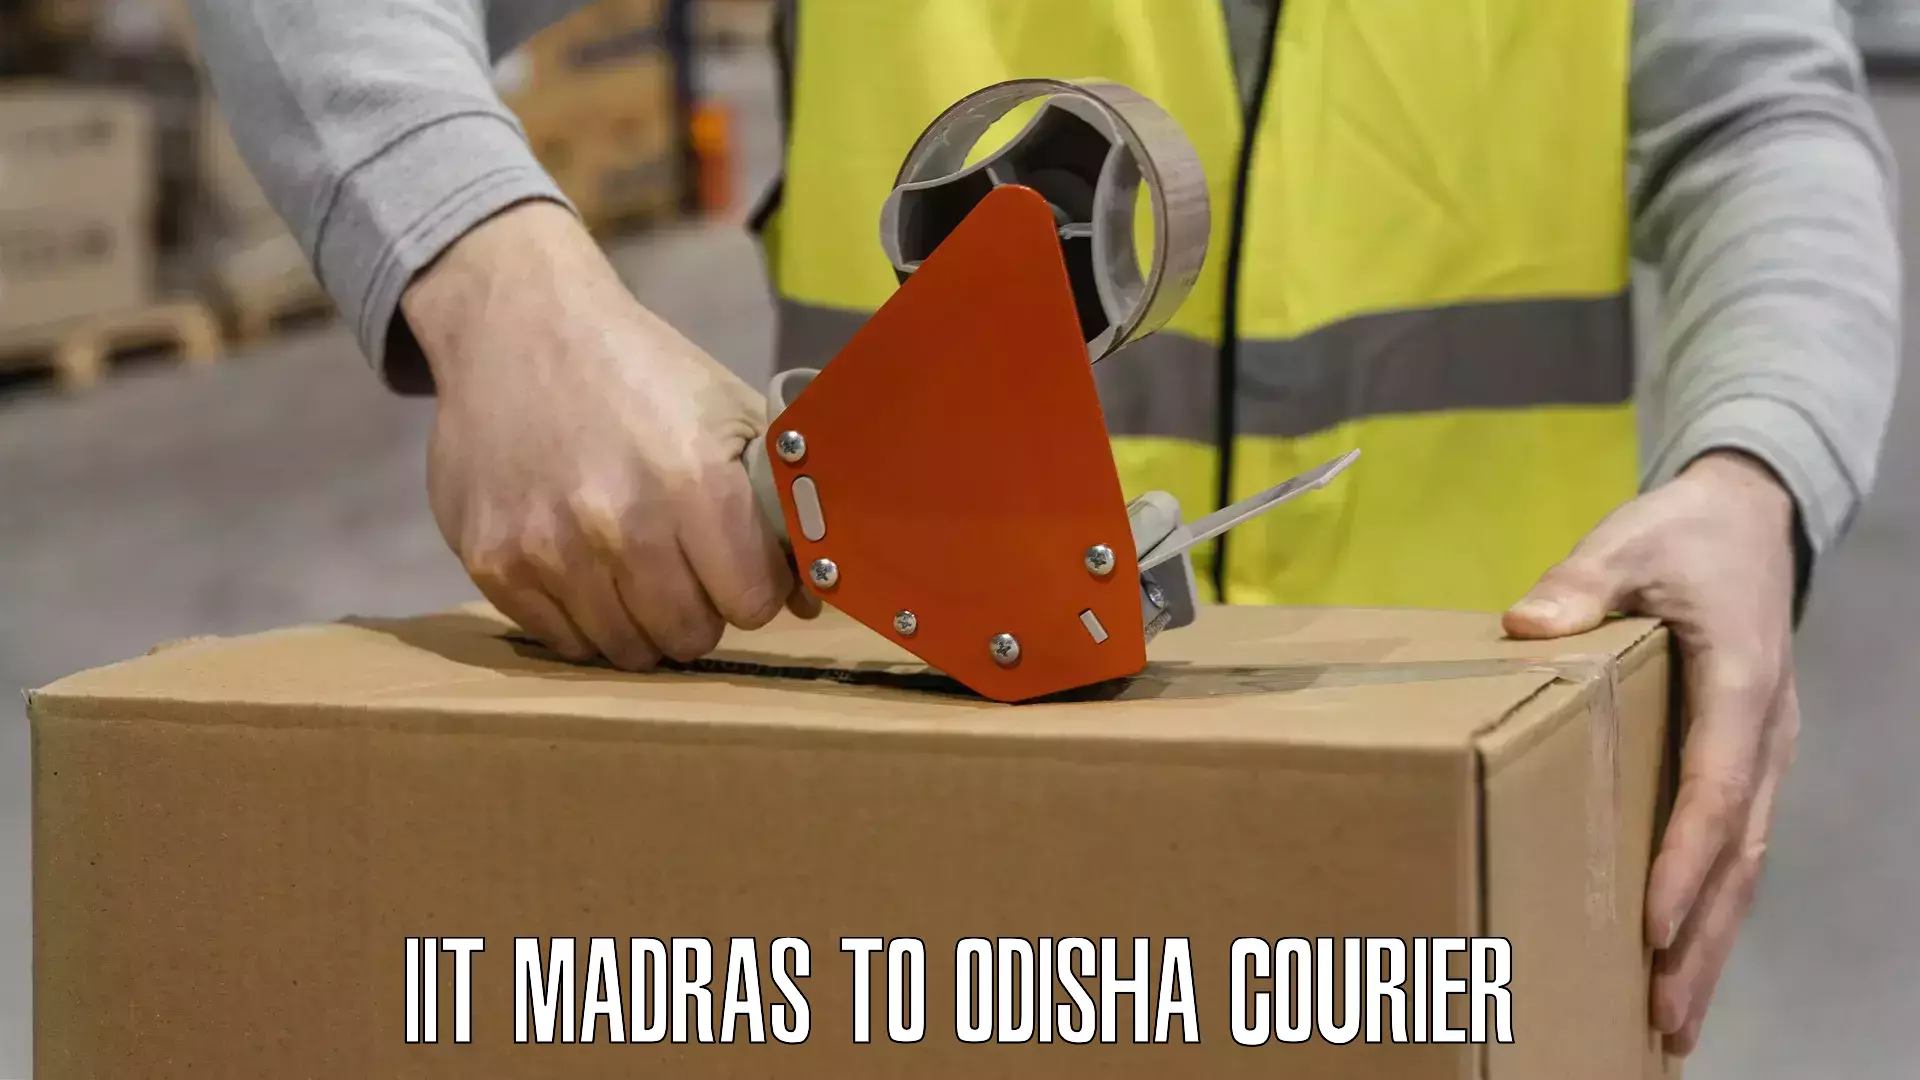 On-call courier service IIT Madras to Khordha